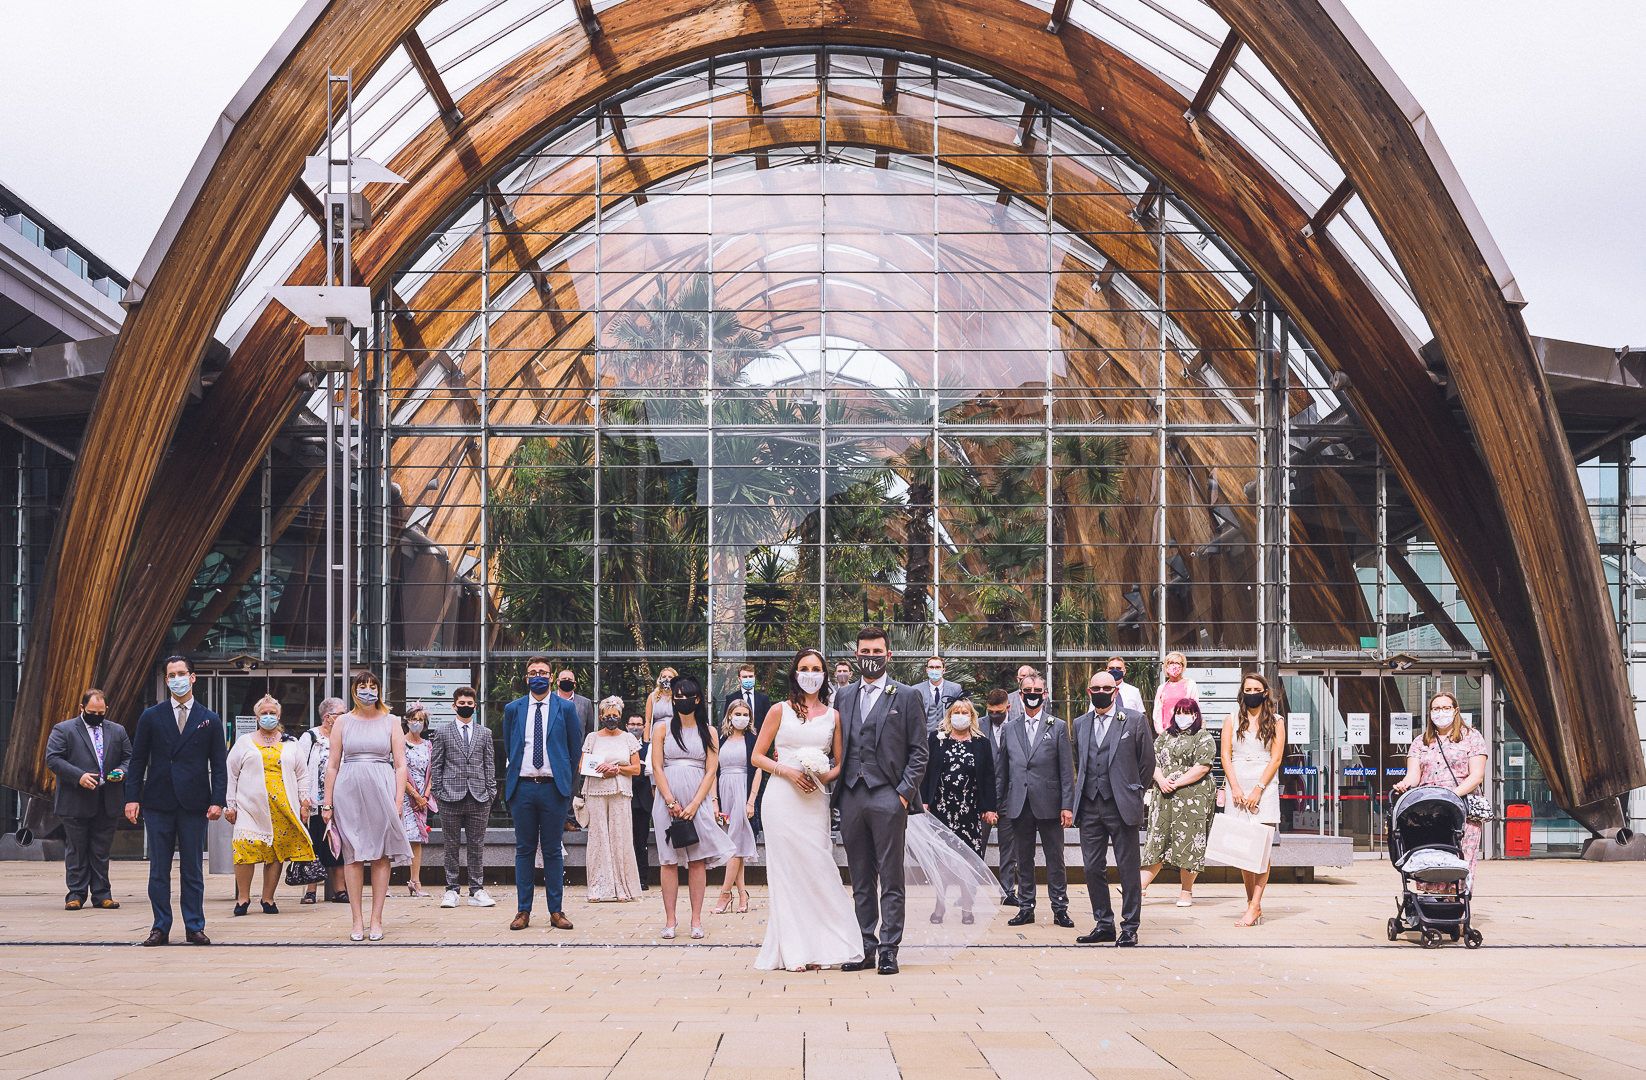 The bride, groom and guests stand apart outside the winter gardens